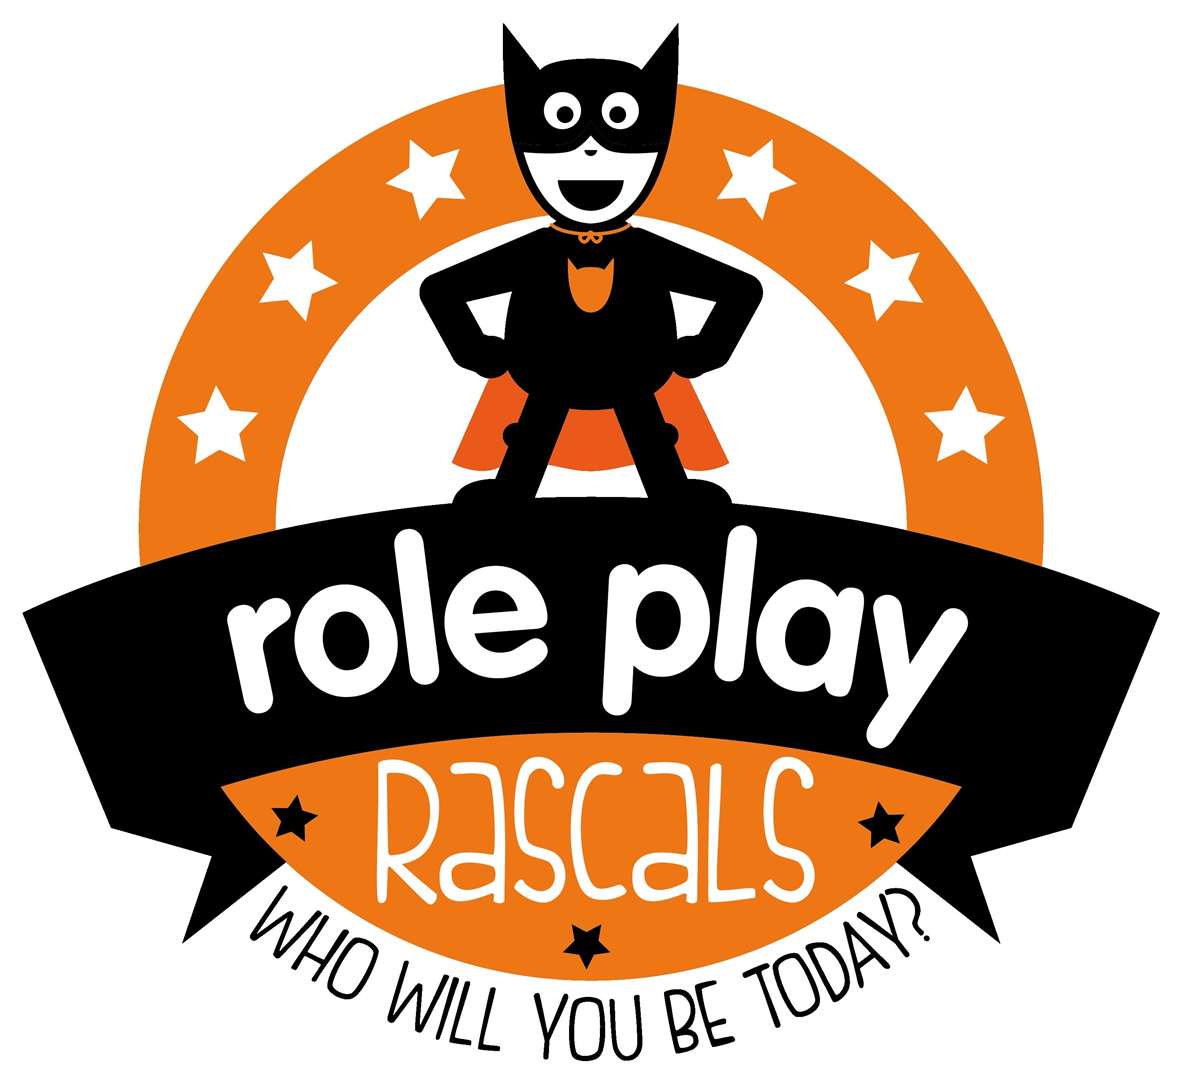 Role Play Rascals is coming to Faversham